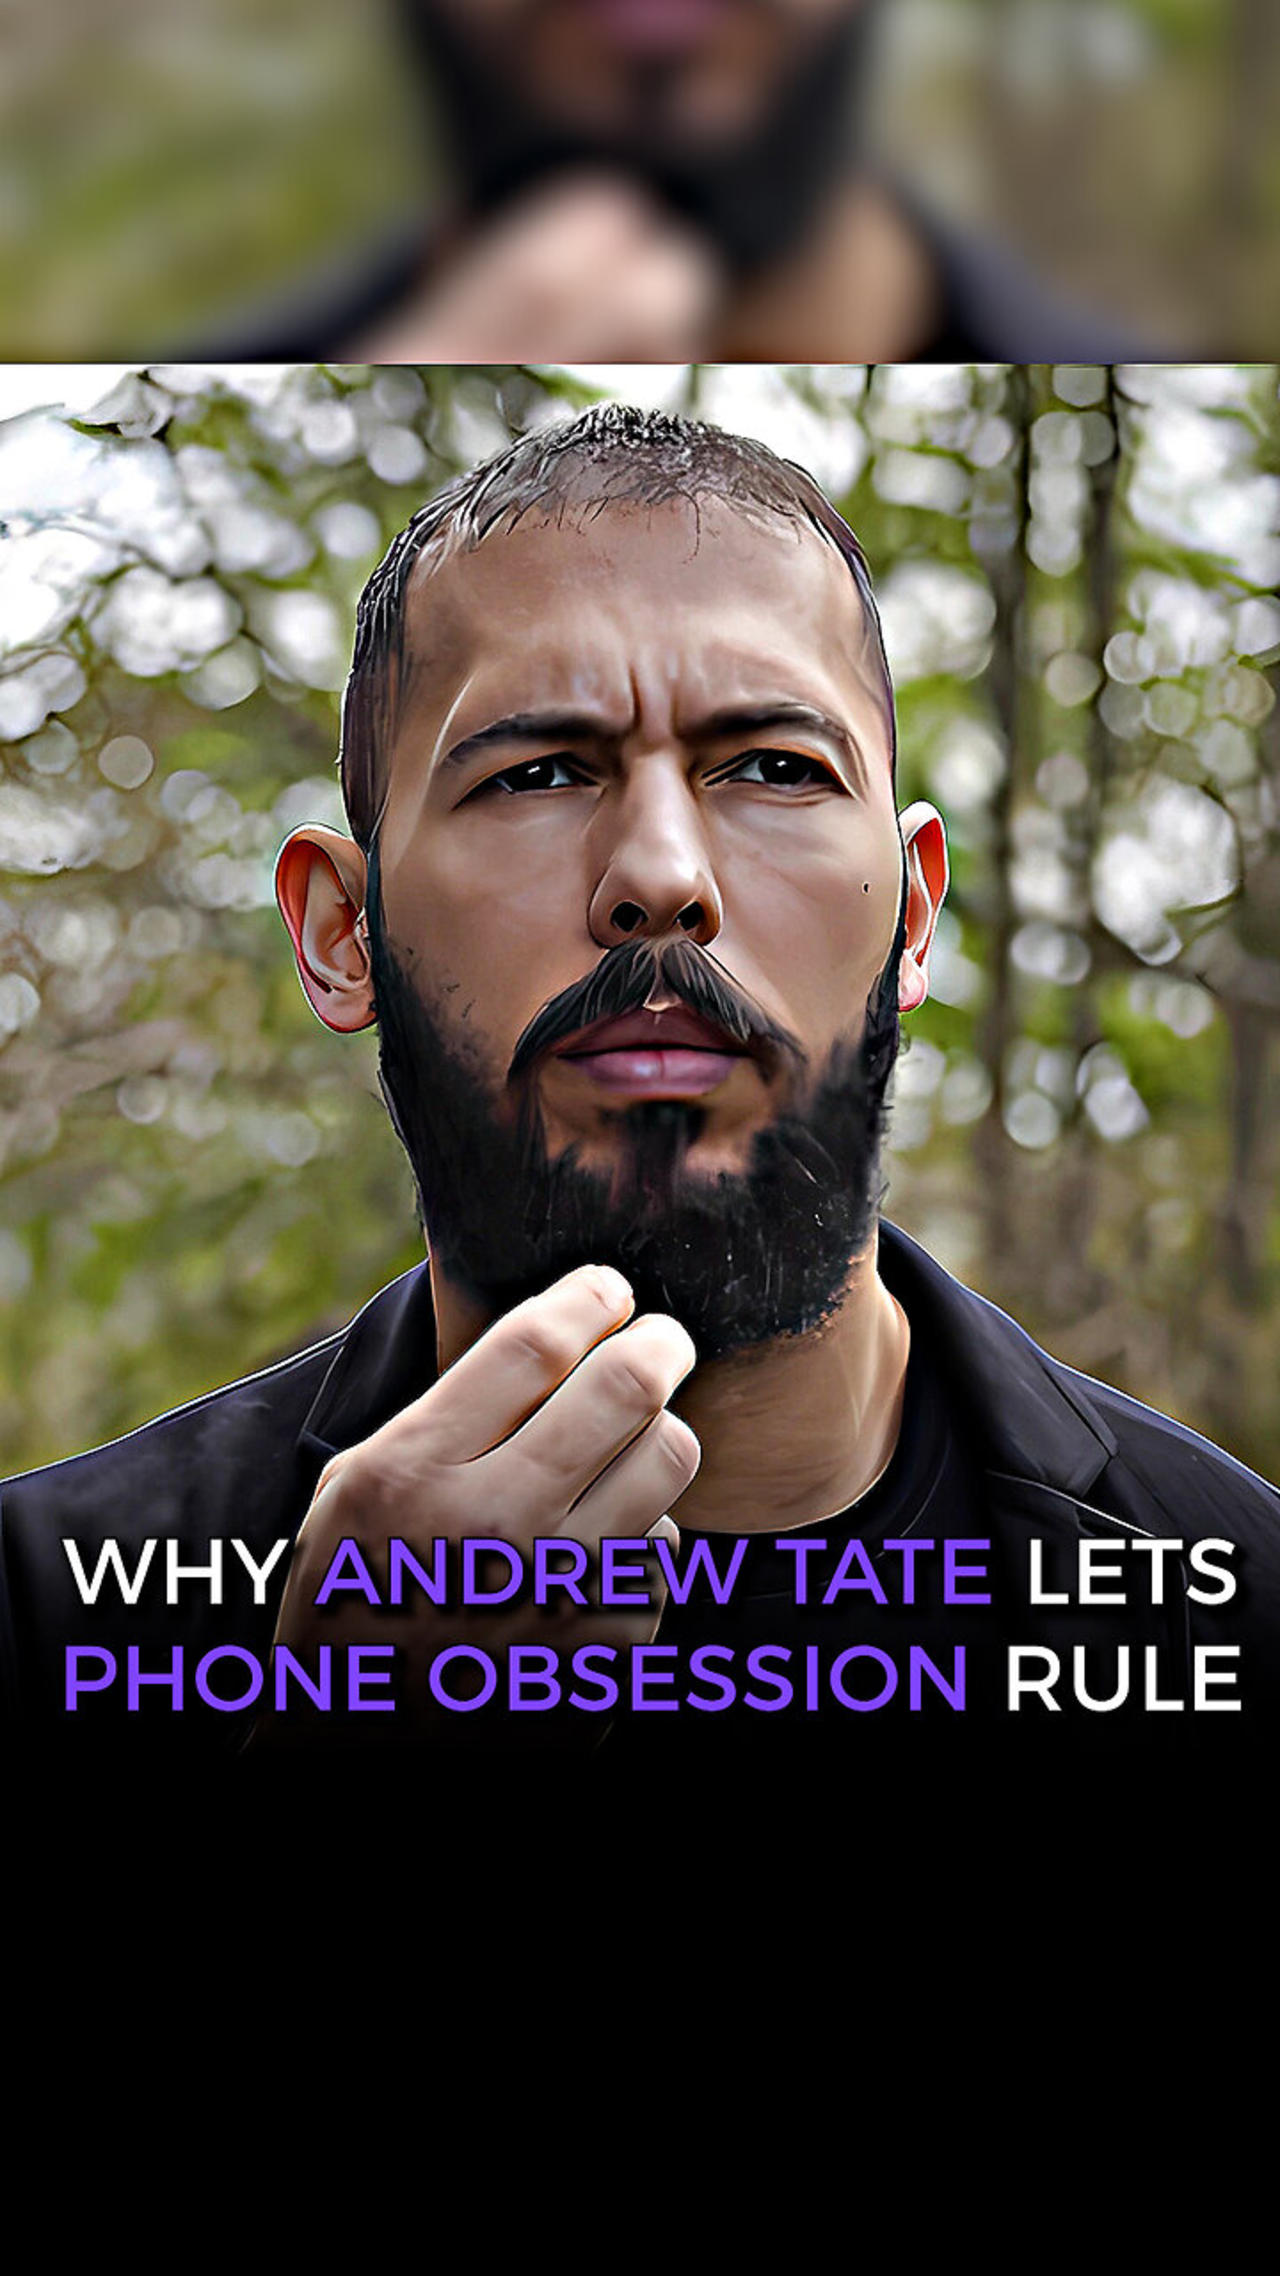 The Power of Mobile: Andrew Tate Opens Up About Letting Phone Obsession Rule